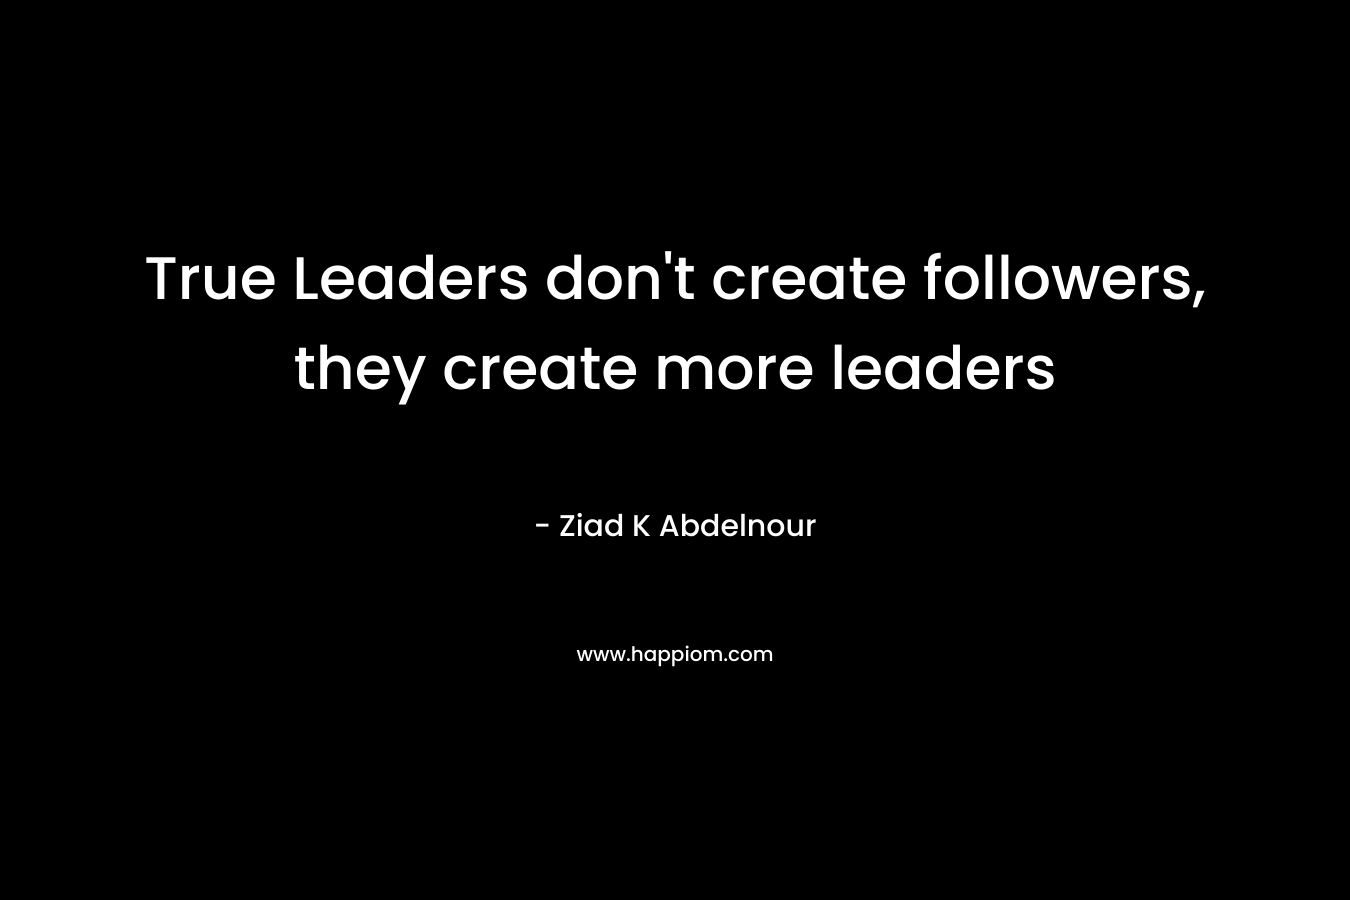 True Leaders don't create followers, they create more leaders